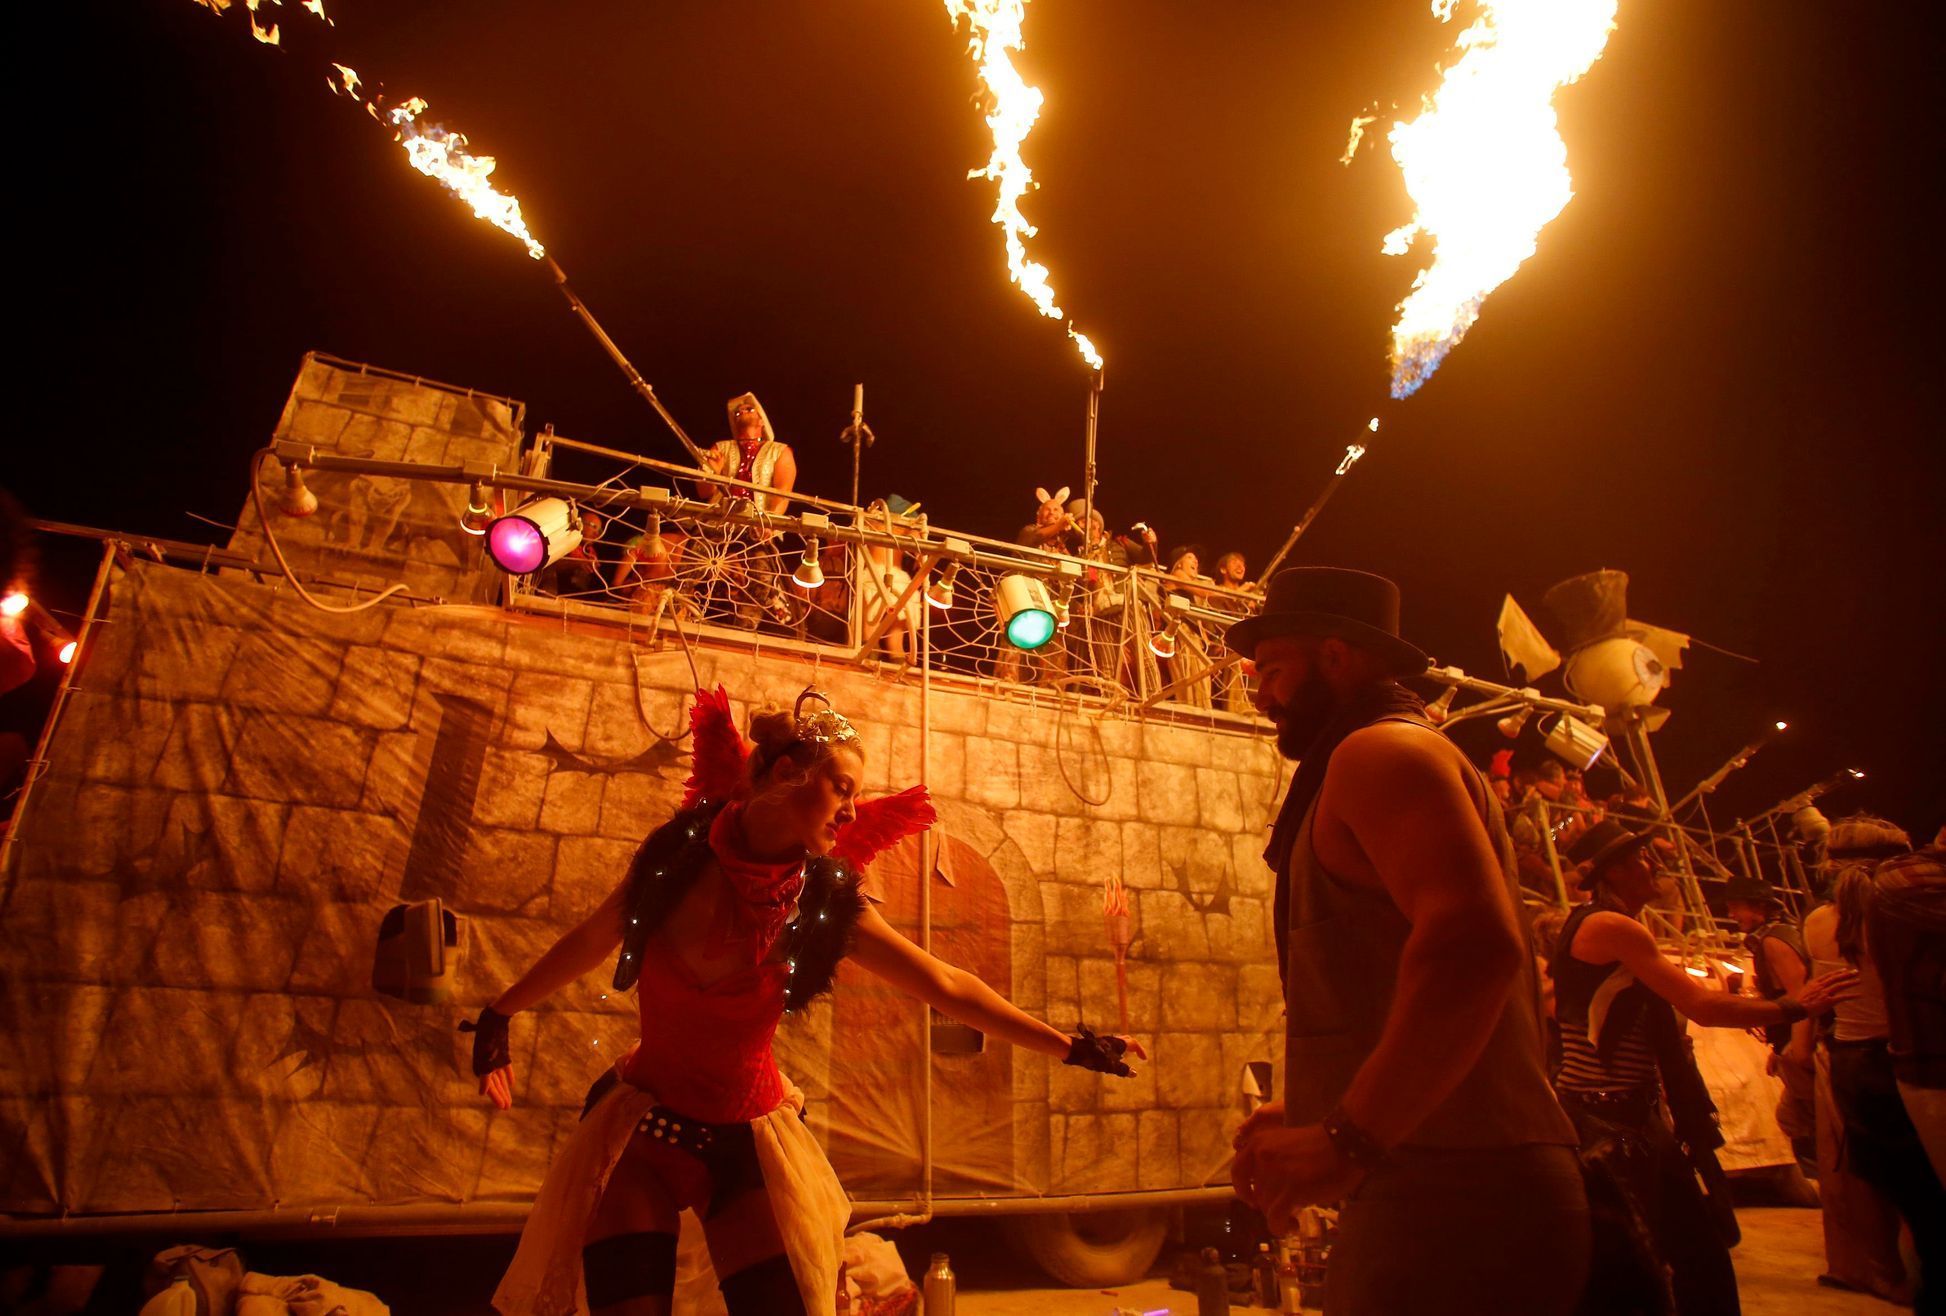 Rachael Neubauer and James Wheeler dance during the Burning Man 2014 &quot;Caravansary&quot; arts and music festival in the Black Rock Desert of Nevada